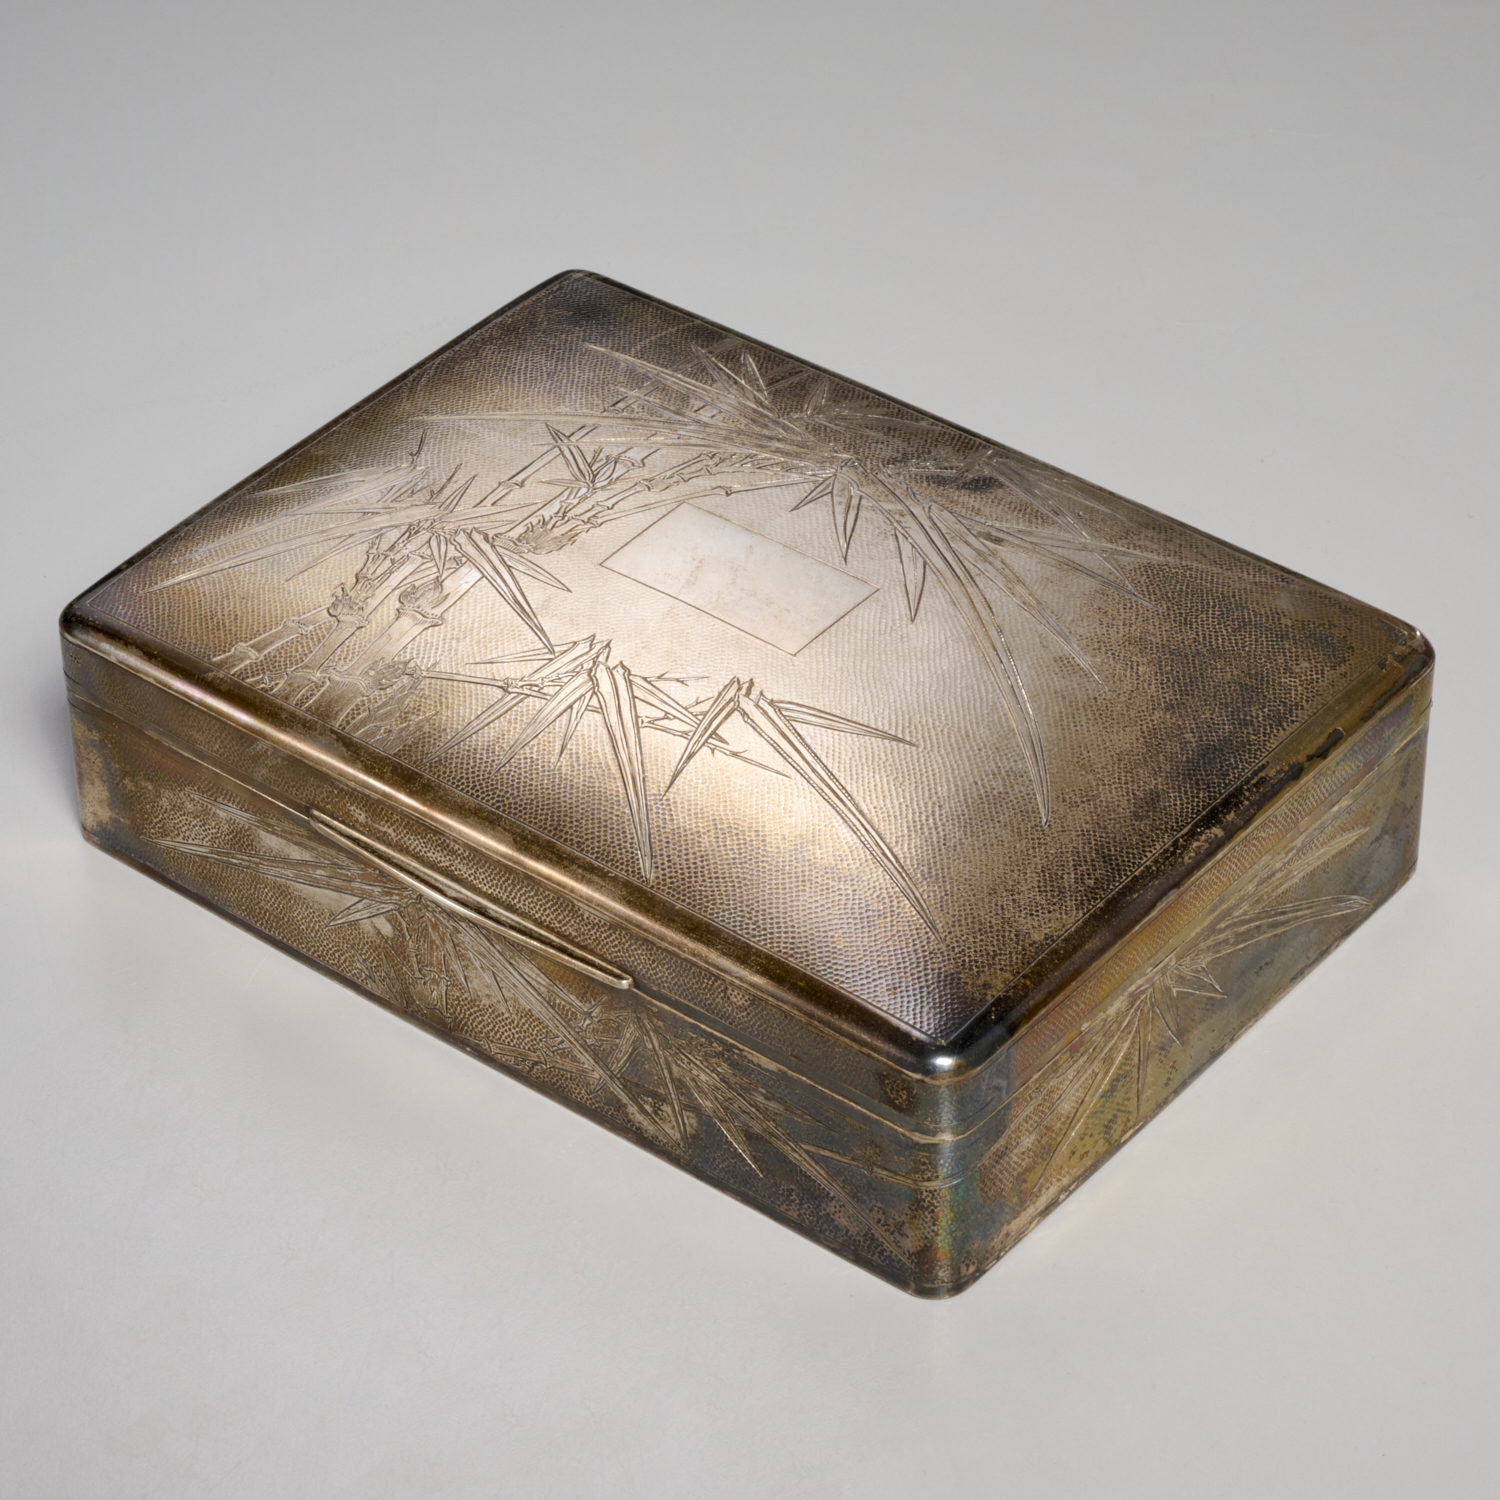 JAPANESE ENGRAVED SILVER BOX Late 2fb5bd